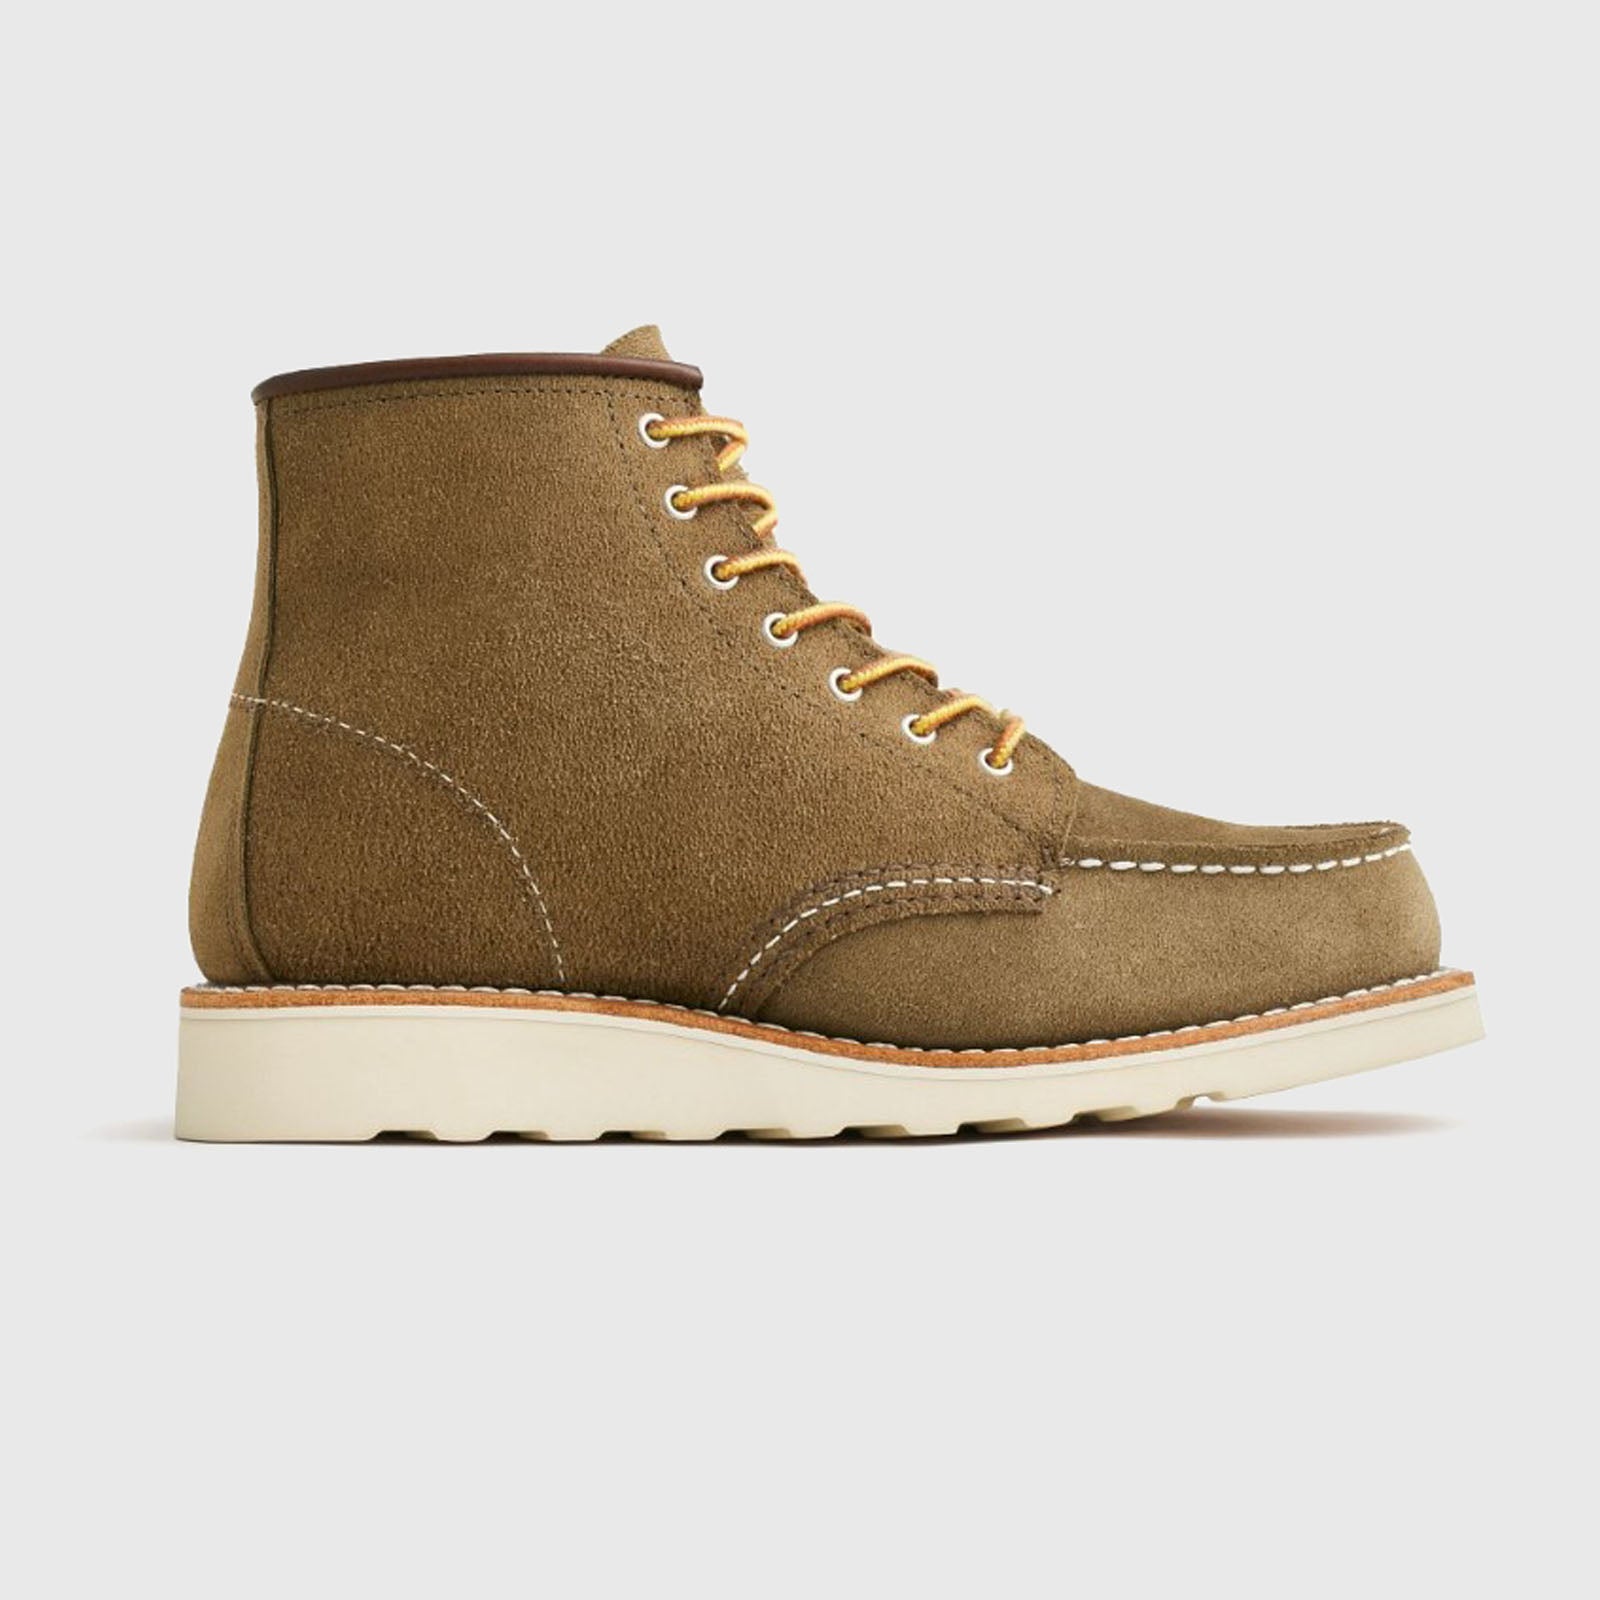 Red Wing Stivaletto 6-inch Classic Moc Toe In Pelle Mohave Verde Oliva Uomo - 7